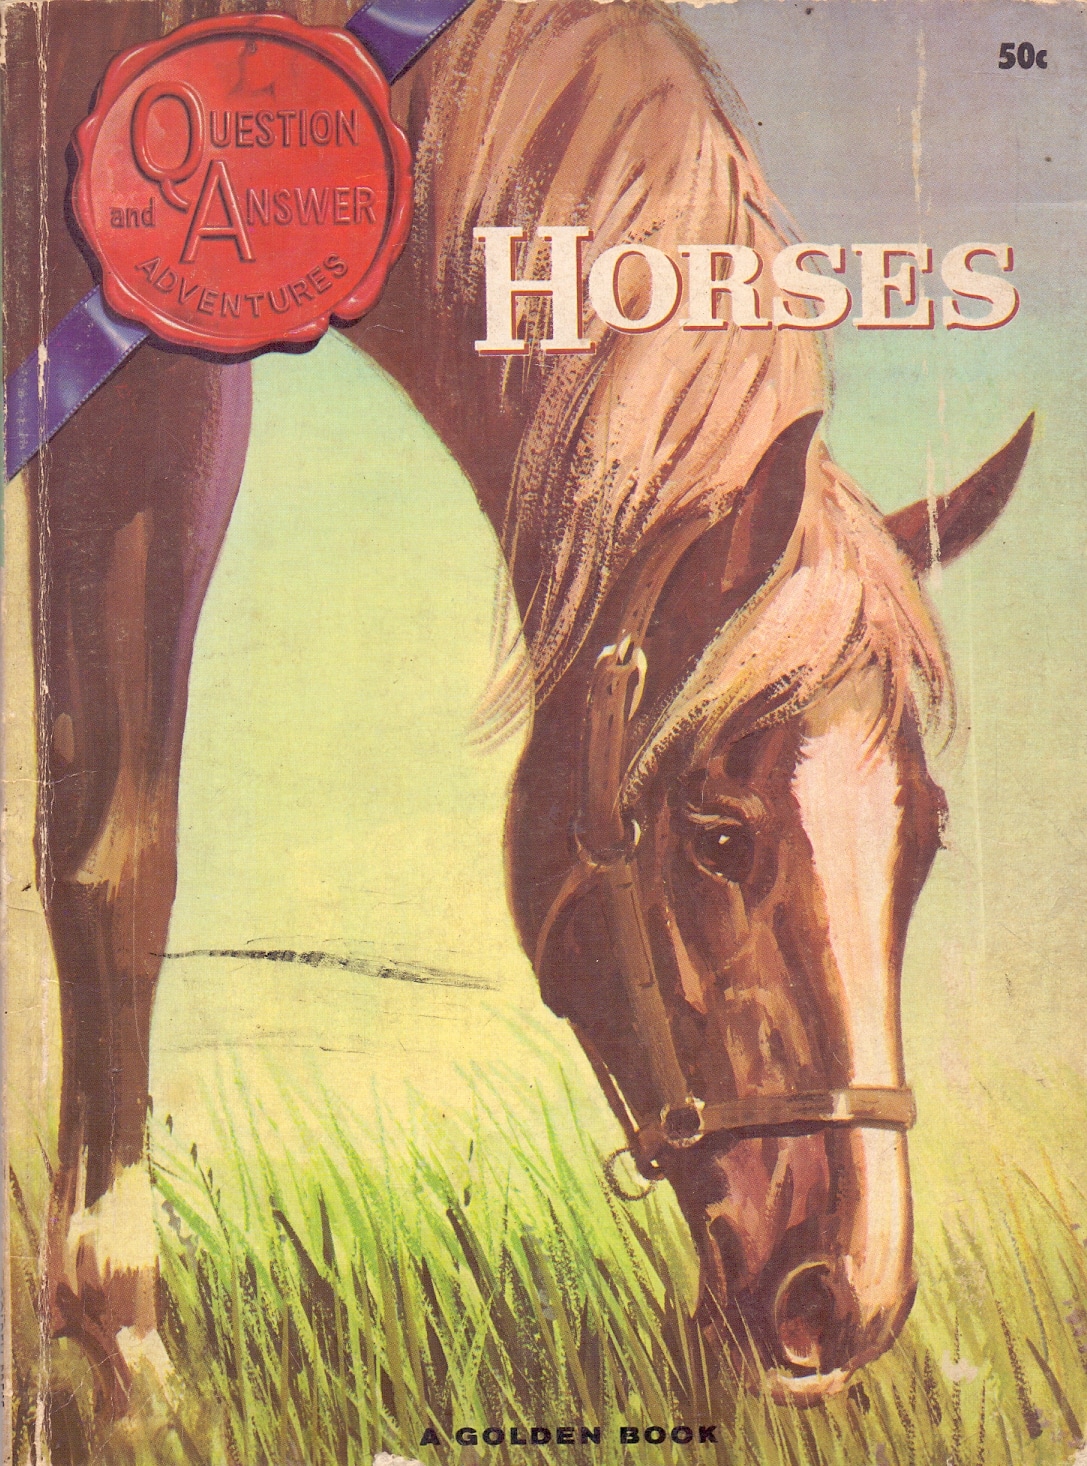 Horses - Question and answer adventures Eugene Rachlis